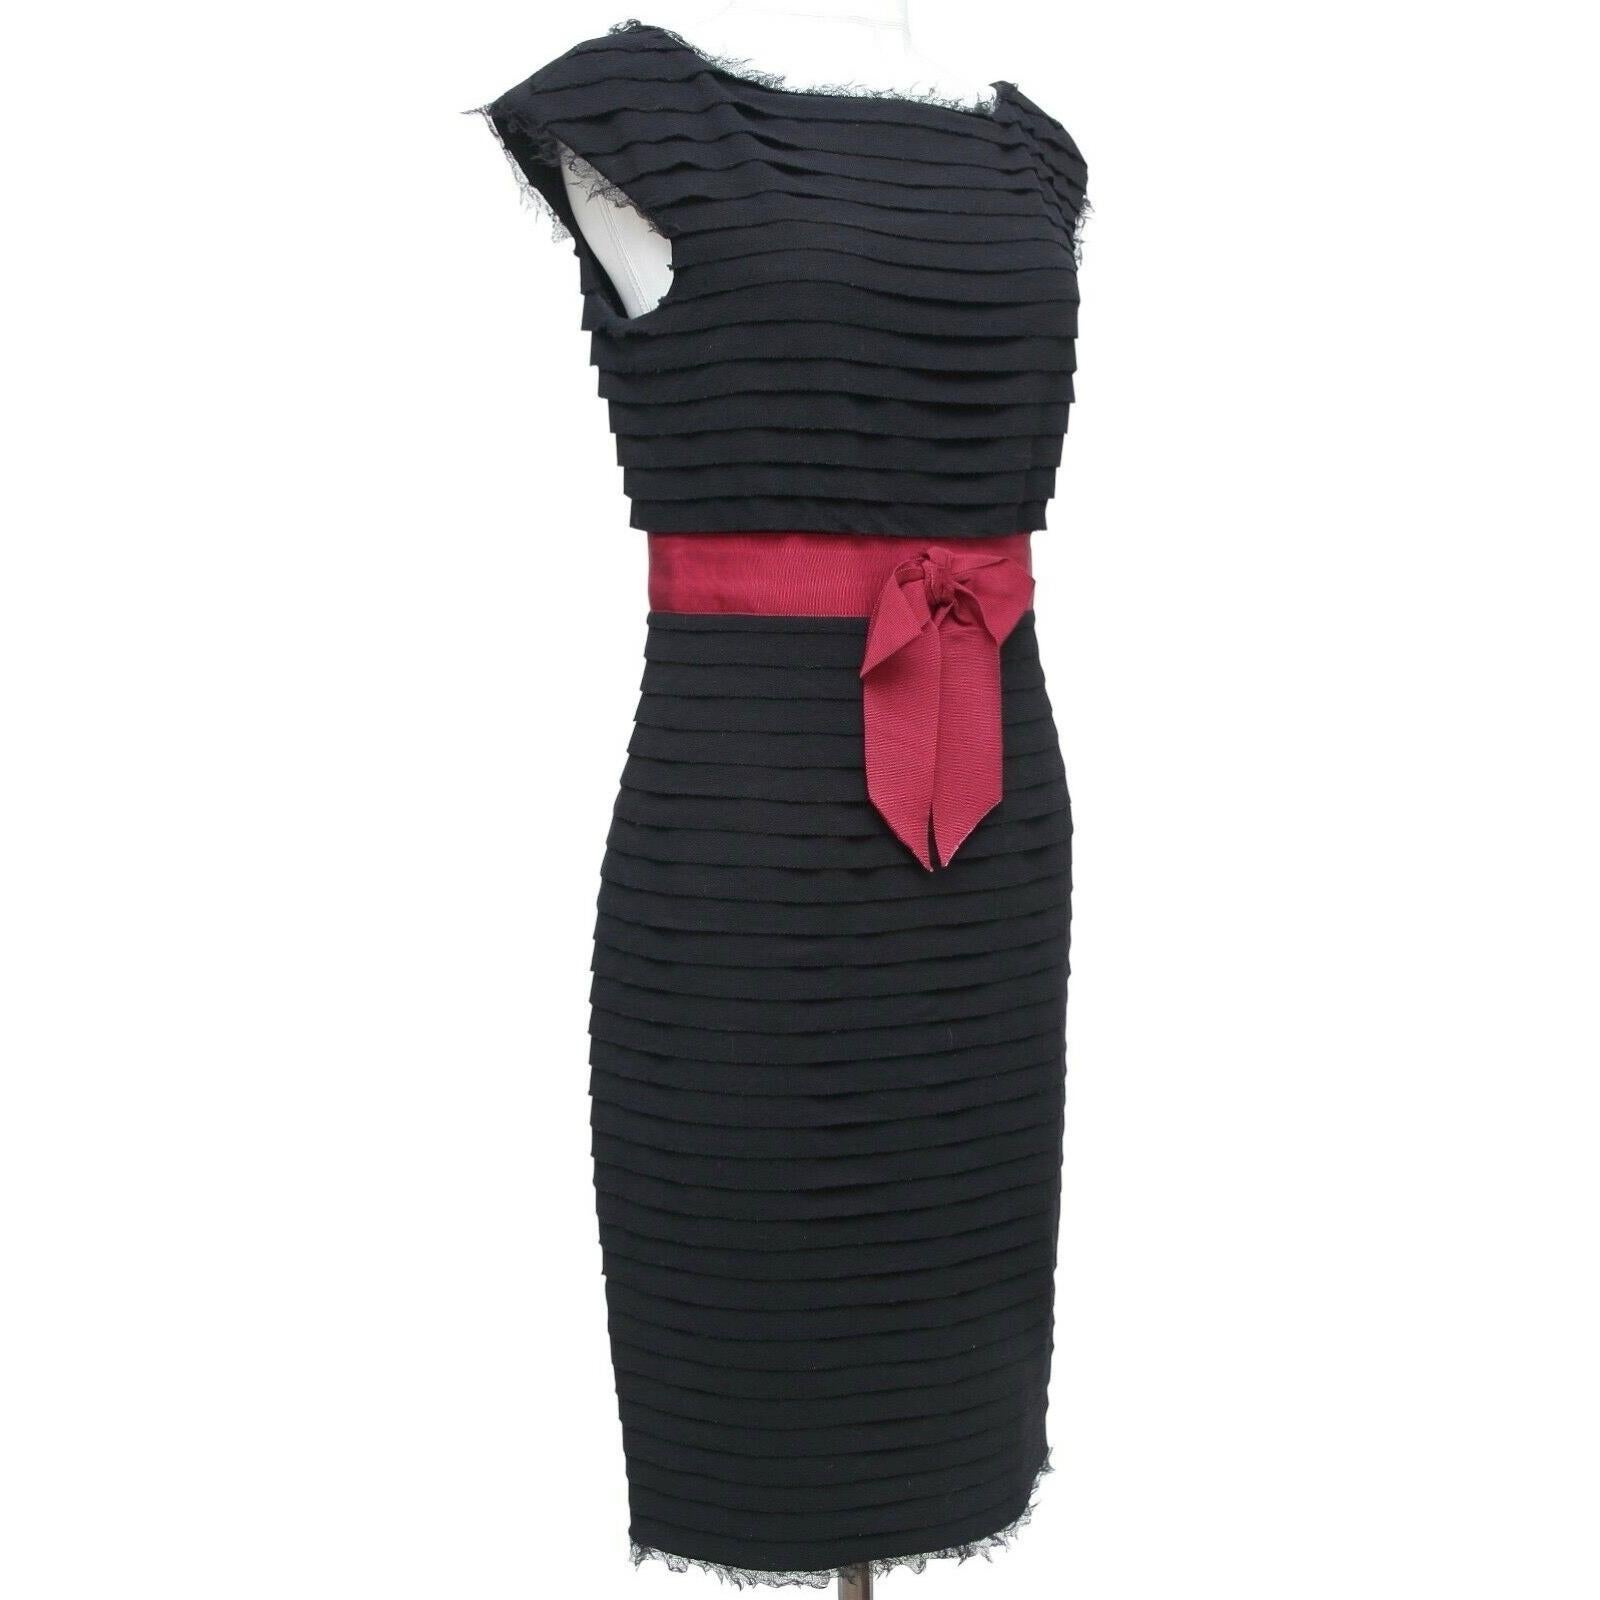 GUARANTEED AUTHENTIC CHANEL BLACK CAP SLEEVE TIERED EVENING DRESS

Details:
• Stunning black wool shift dress tiered detail throughout.
• At waistline is a grosgrain red attached ribbon and bow.
• Lace trim at neckline, arms and hem.
• Bateau